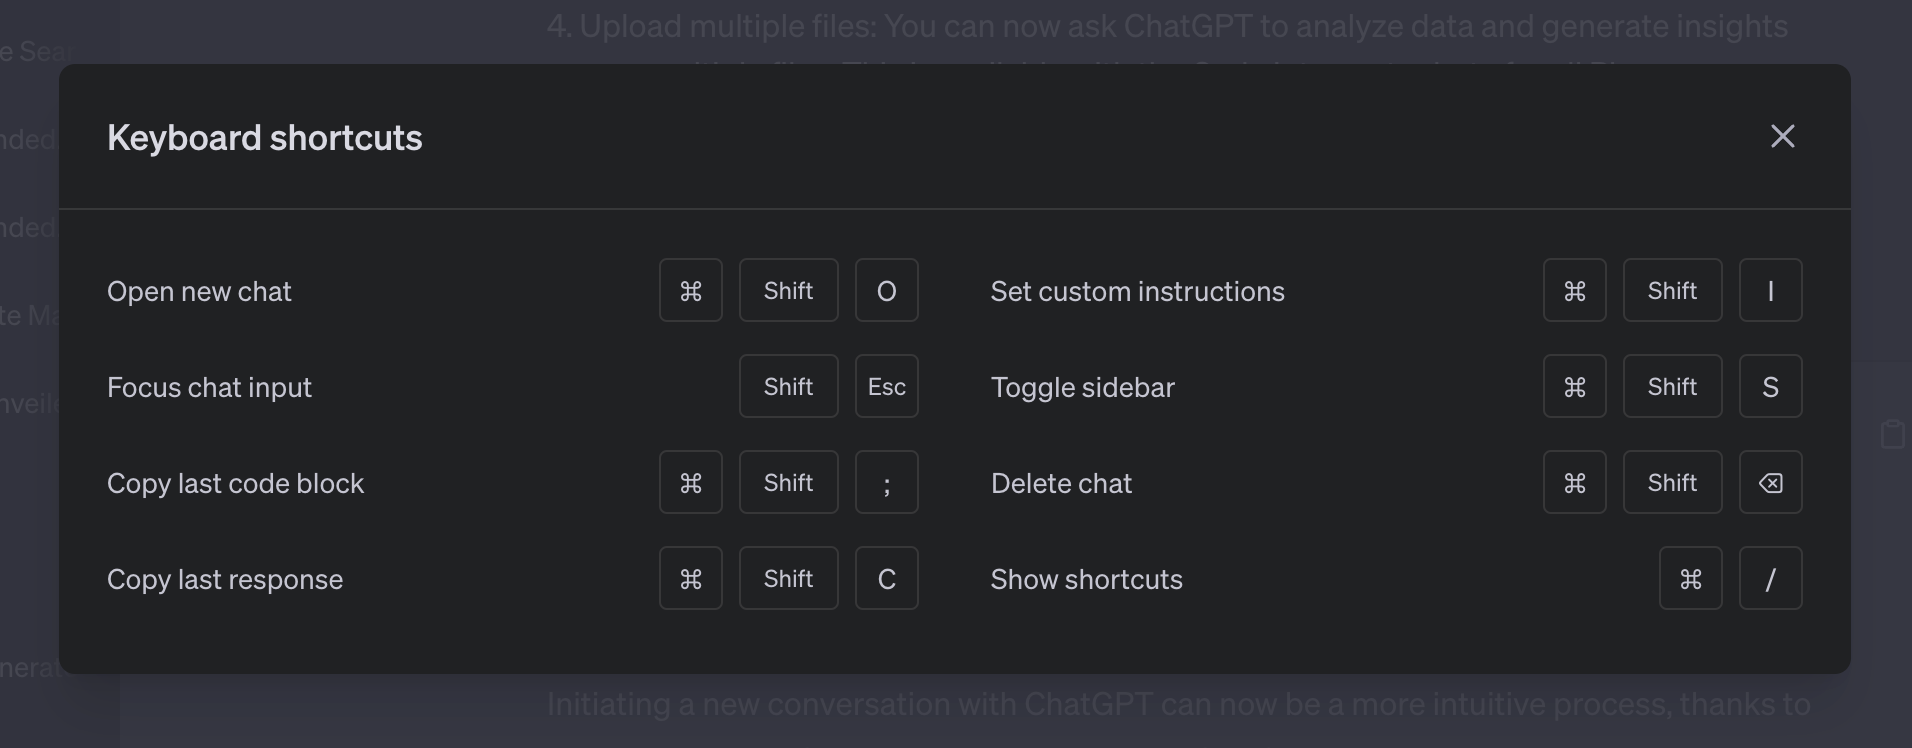 Meet the 6 new ChatGPT features that were introduced this week.